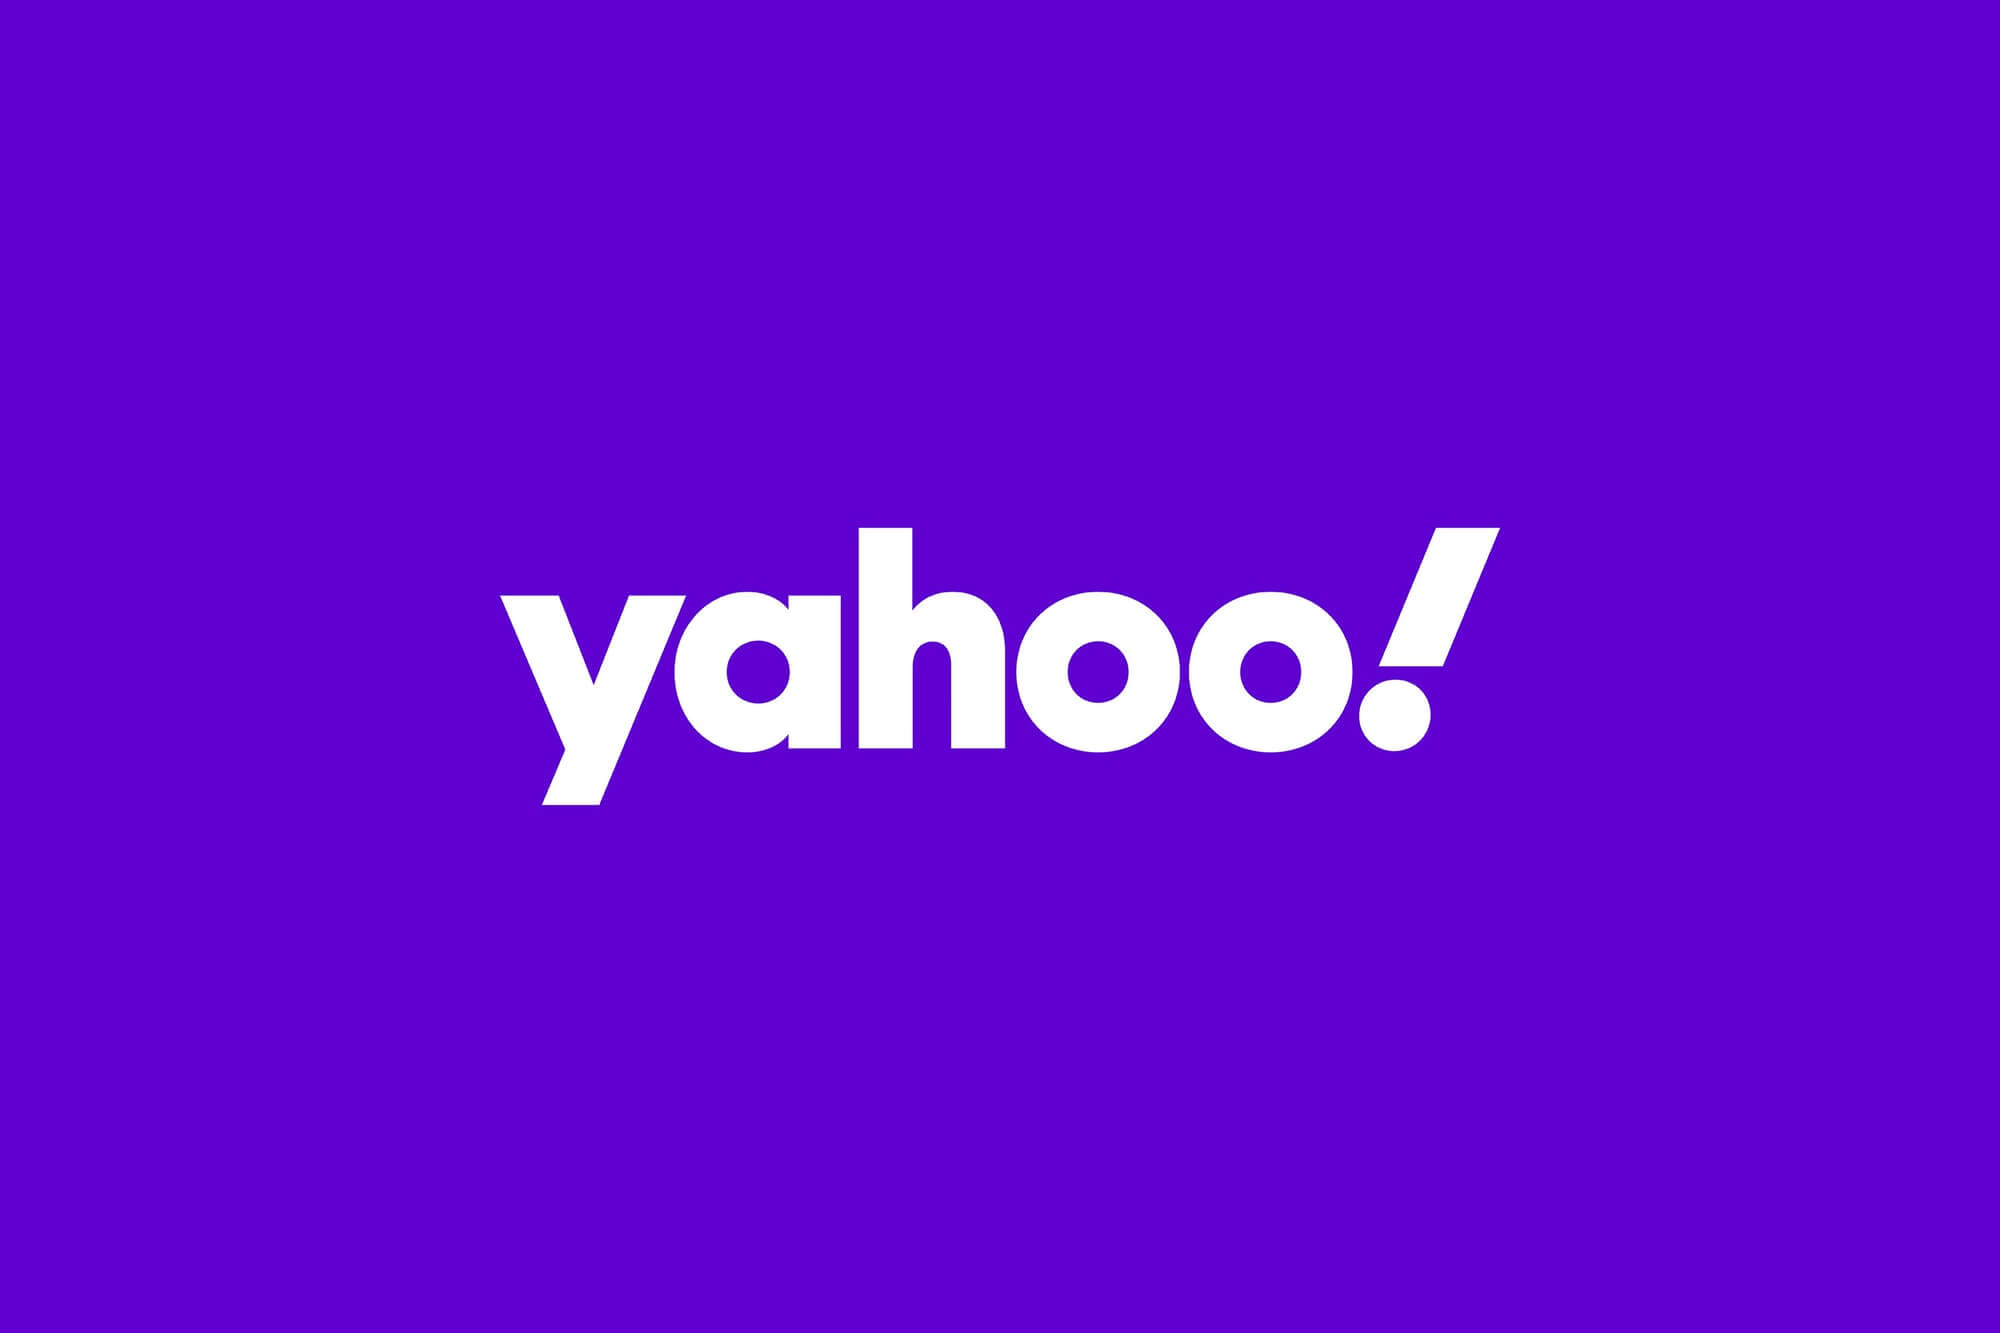 Yahoo ceases service in China due to challenging business and legal environment